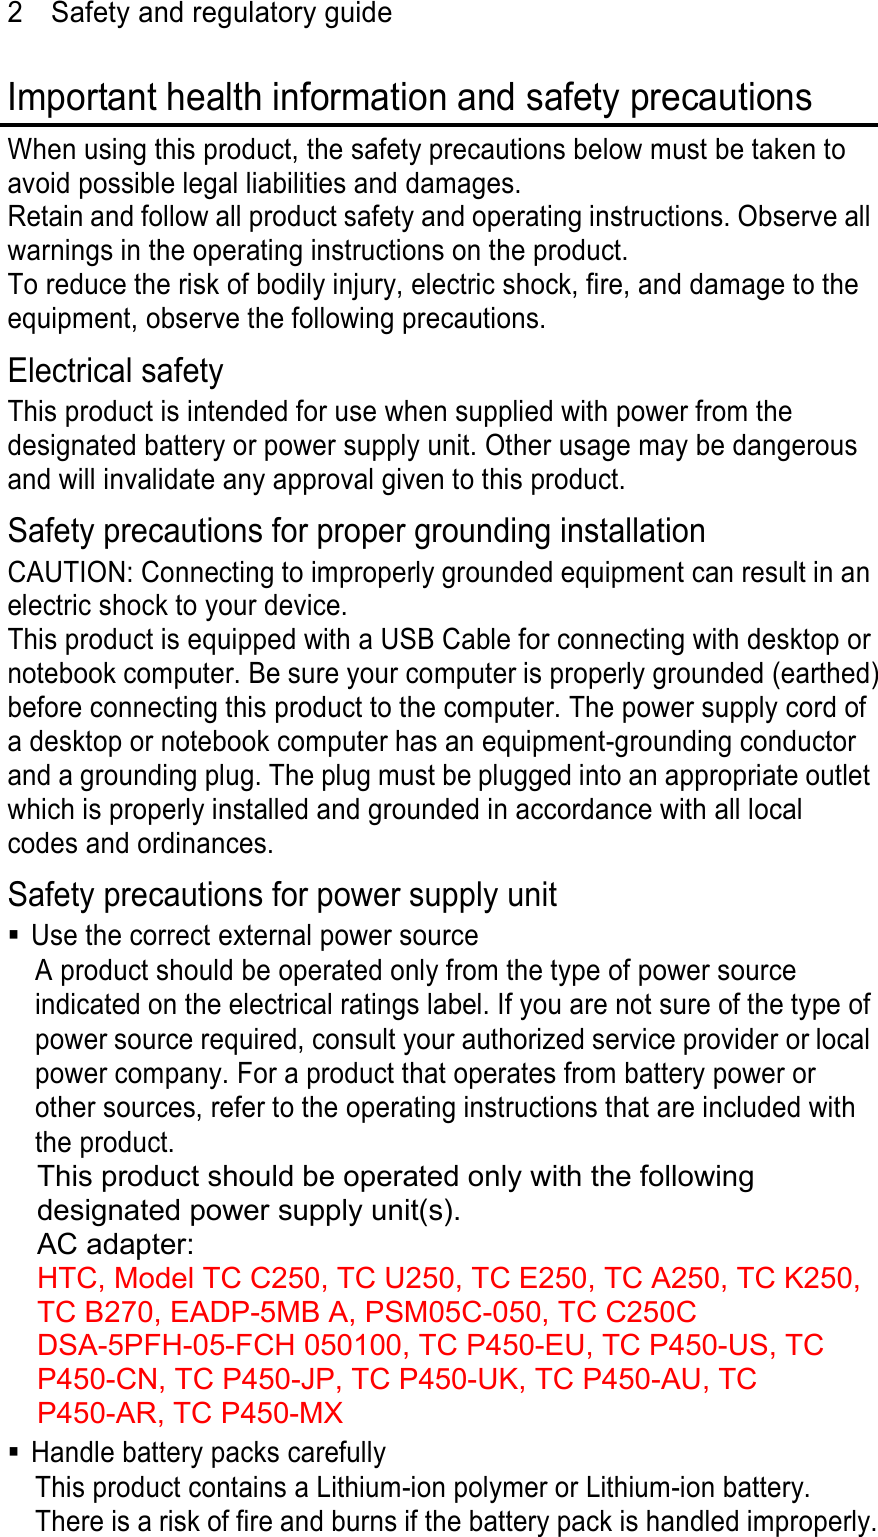 2  Safety and regulatory guide Important health information and safety precautions When using this product, the safety precautions below must be taken to avoid possible legal liabilities and damages. Retain and follow all product safety and operating instructions. Observe all warnings in the operating instructions on the product. To reduce the risk of bodily injury, electric shock, fire, and damage to the equipment, observe the following precautions. Electrical safety This product is intended for use when supplied with power from the designated battery or power supply unit. Other usage may be dangerous and will invalidate any approval given to this product. Safety precautions for proper grounding installation CAUTION: Connecting to improperly grounded equipment can result in an electric shock to your device. This product is equipped with a USB Cable for connecting with desktop or notebook computer. Be sure your computer is properly grounded (earthed) before connecting this product to the computer. The power supply cord of a desktop or notebook computer has an equipment-grounding conductor and a grounding plug. The plug must be plugged into an appropriate outlet which is properly installed and grounded in accordance with all local codes and ordinances. Safety precautions for power supply unit   Use the correct external power source A product should be operated only from the type of power source indicated on the electrical ratings label. If you are not sure of the type of power source required, consult your authorized service provider or local power company. For a product that operates from battery power or other sources, refer to the operating instructions that are included with the product. This product should be operated only with the following designated power supply unit(s). AC adapter: HTC, Model TC C250, TC U250, TC E250, TC A250, TC K250, TC B270, EADP-5MB A, PSM05C-050, TC C250C DSA-5PFH-05-FCH 050100, TC P450-EU, TC P450-US, TC P450-CN, TC P450-JP, TC P450-UK, TC P450-AU, TC P450-AR, TC P450-MX   Handle battery packs carefully This product contains a Lithium-ion polymer or Lithium-ion battery. There is a risk of fire and burns if the battery pack is handled improperly. 